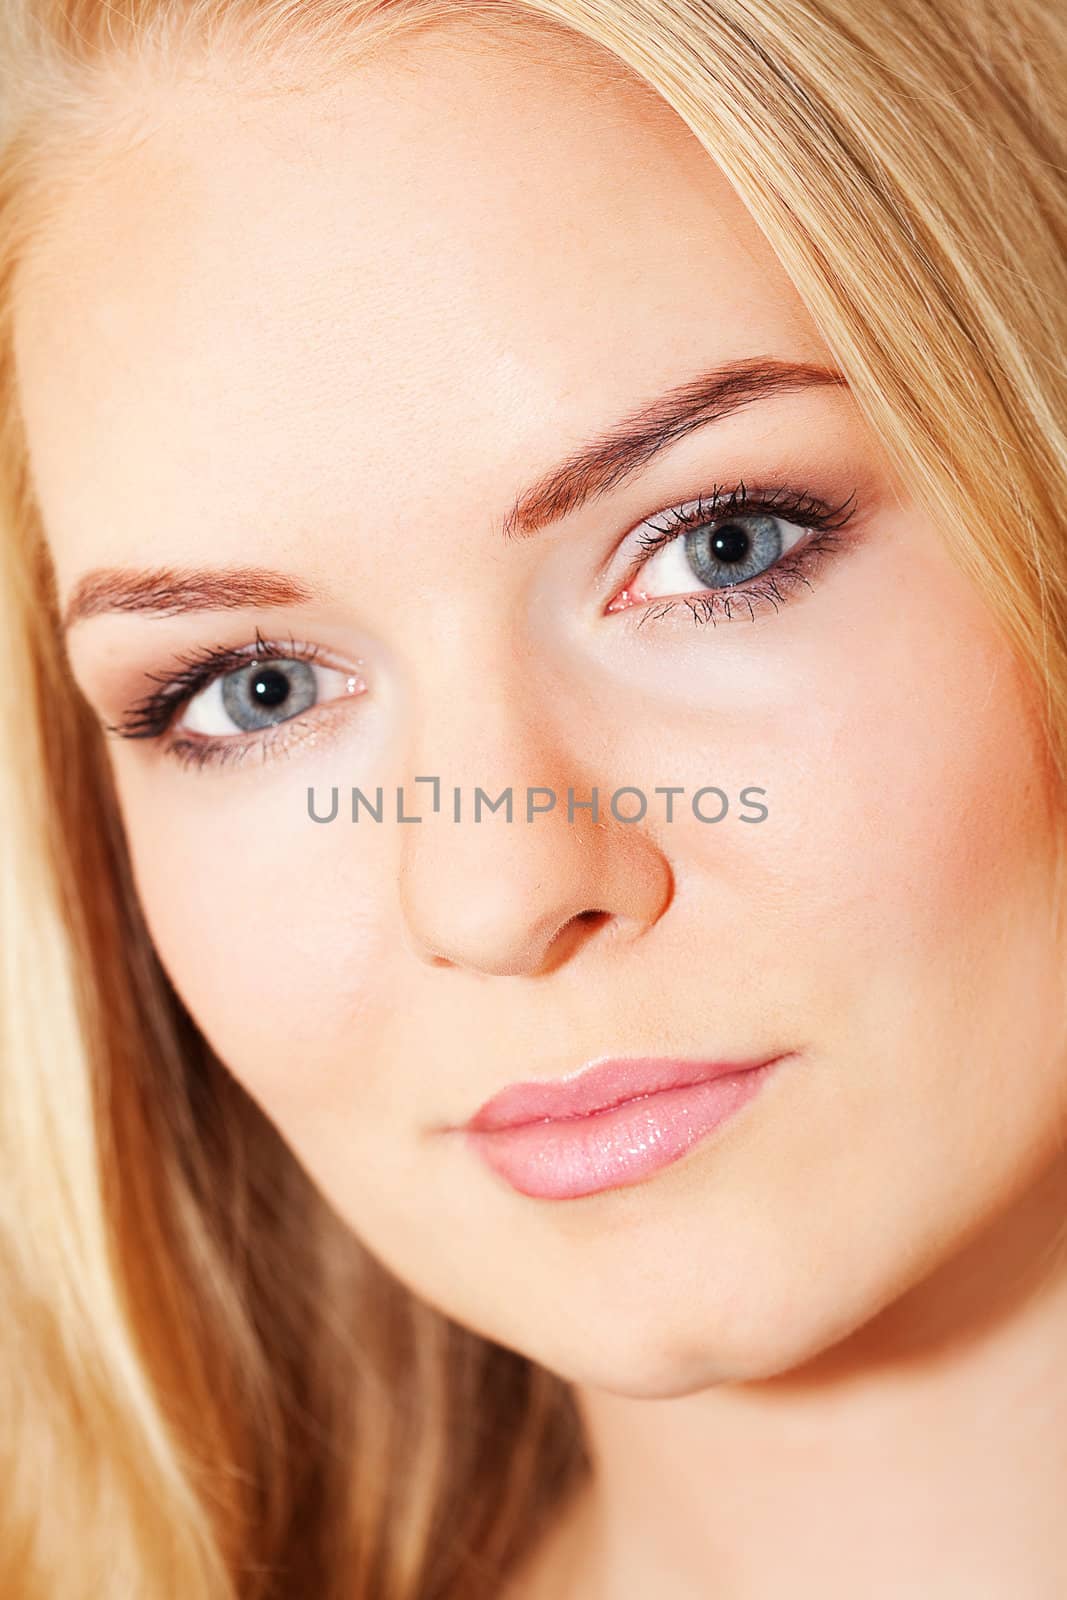 portrait of a beautiful young woman in studio